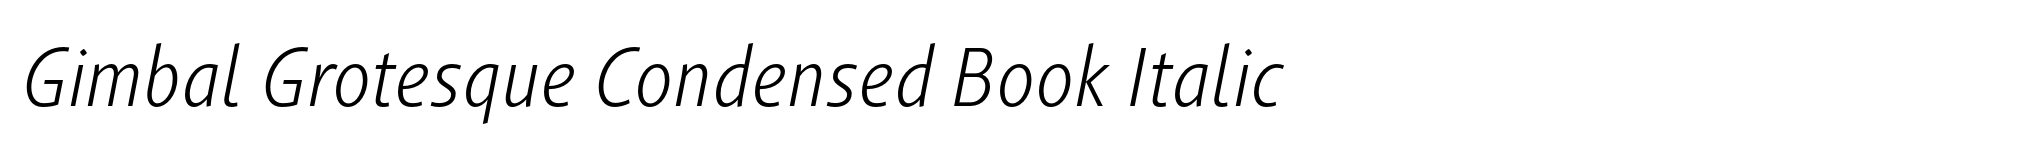 Gimbal Grotesque Condensed Book Italic image